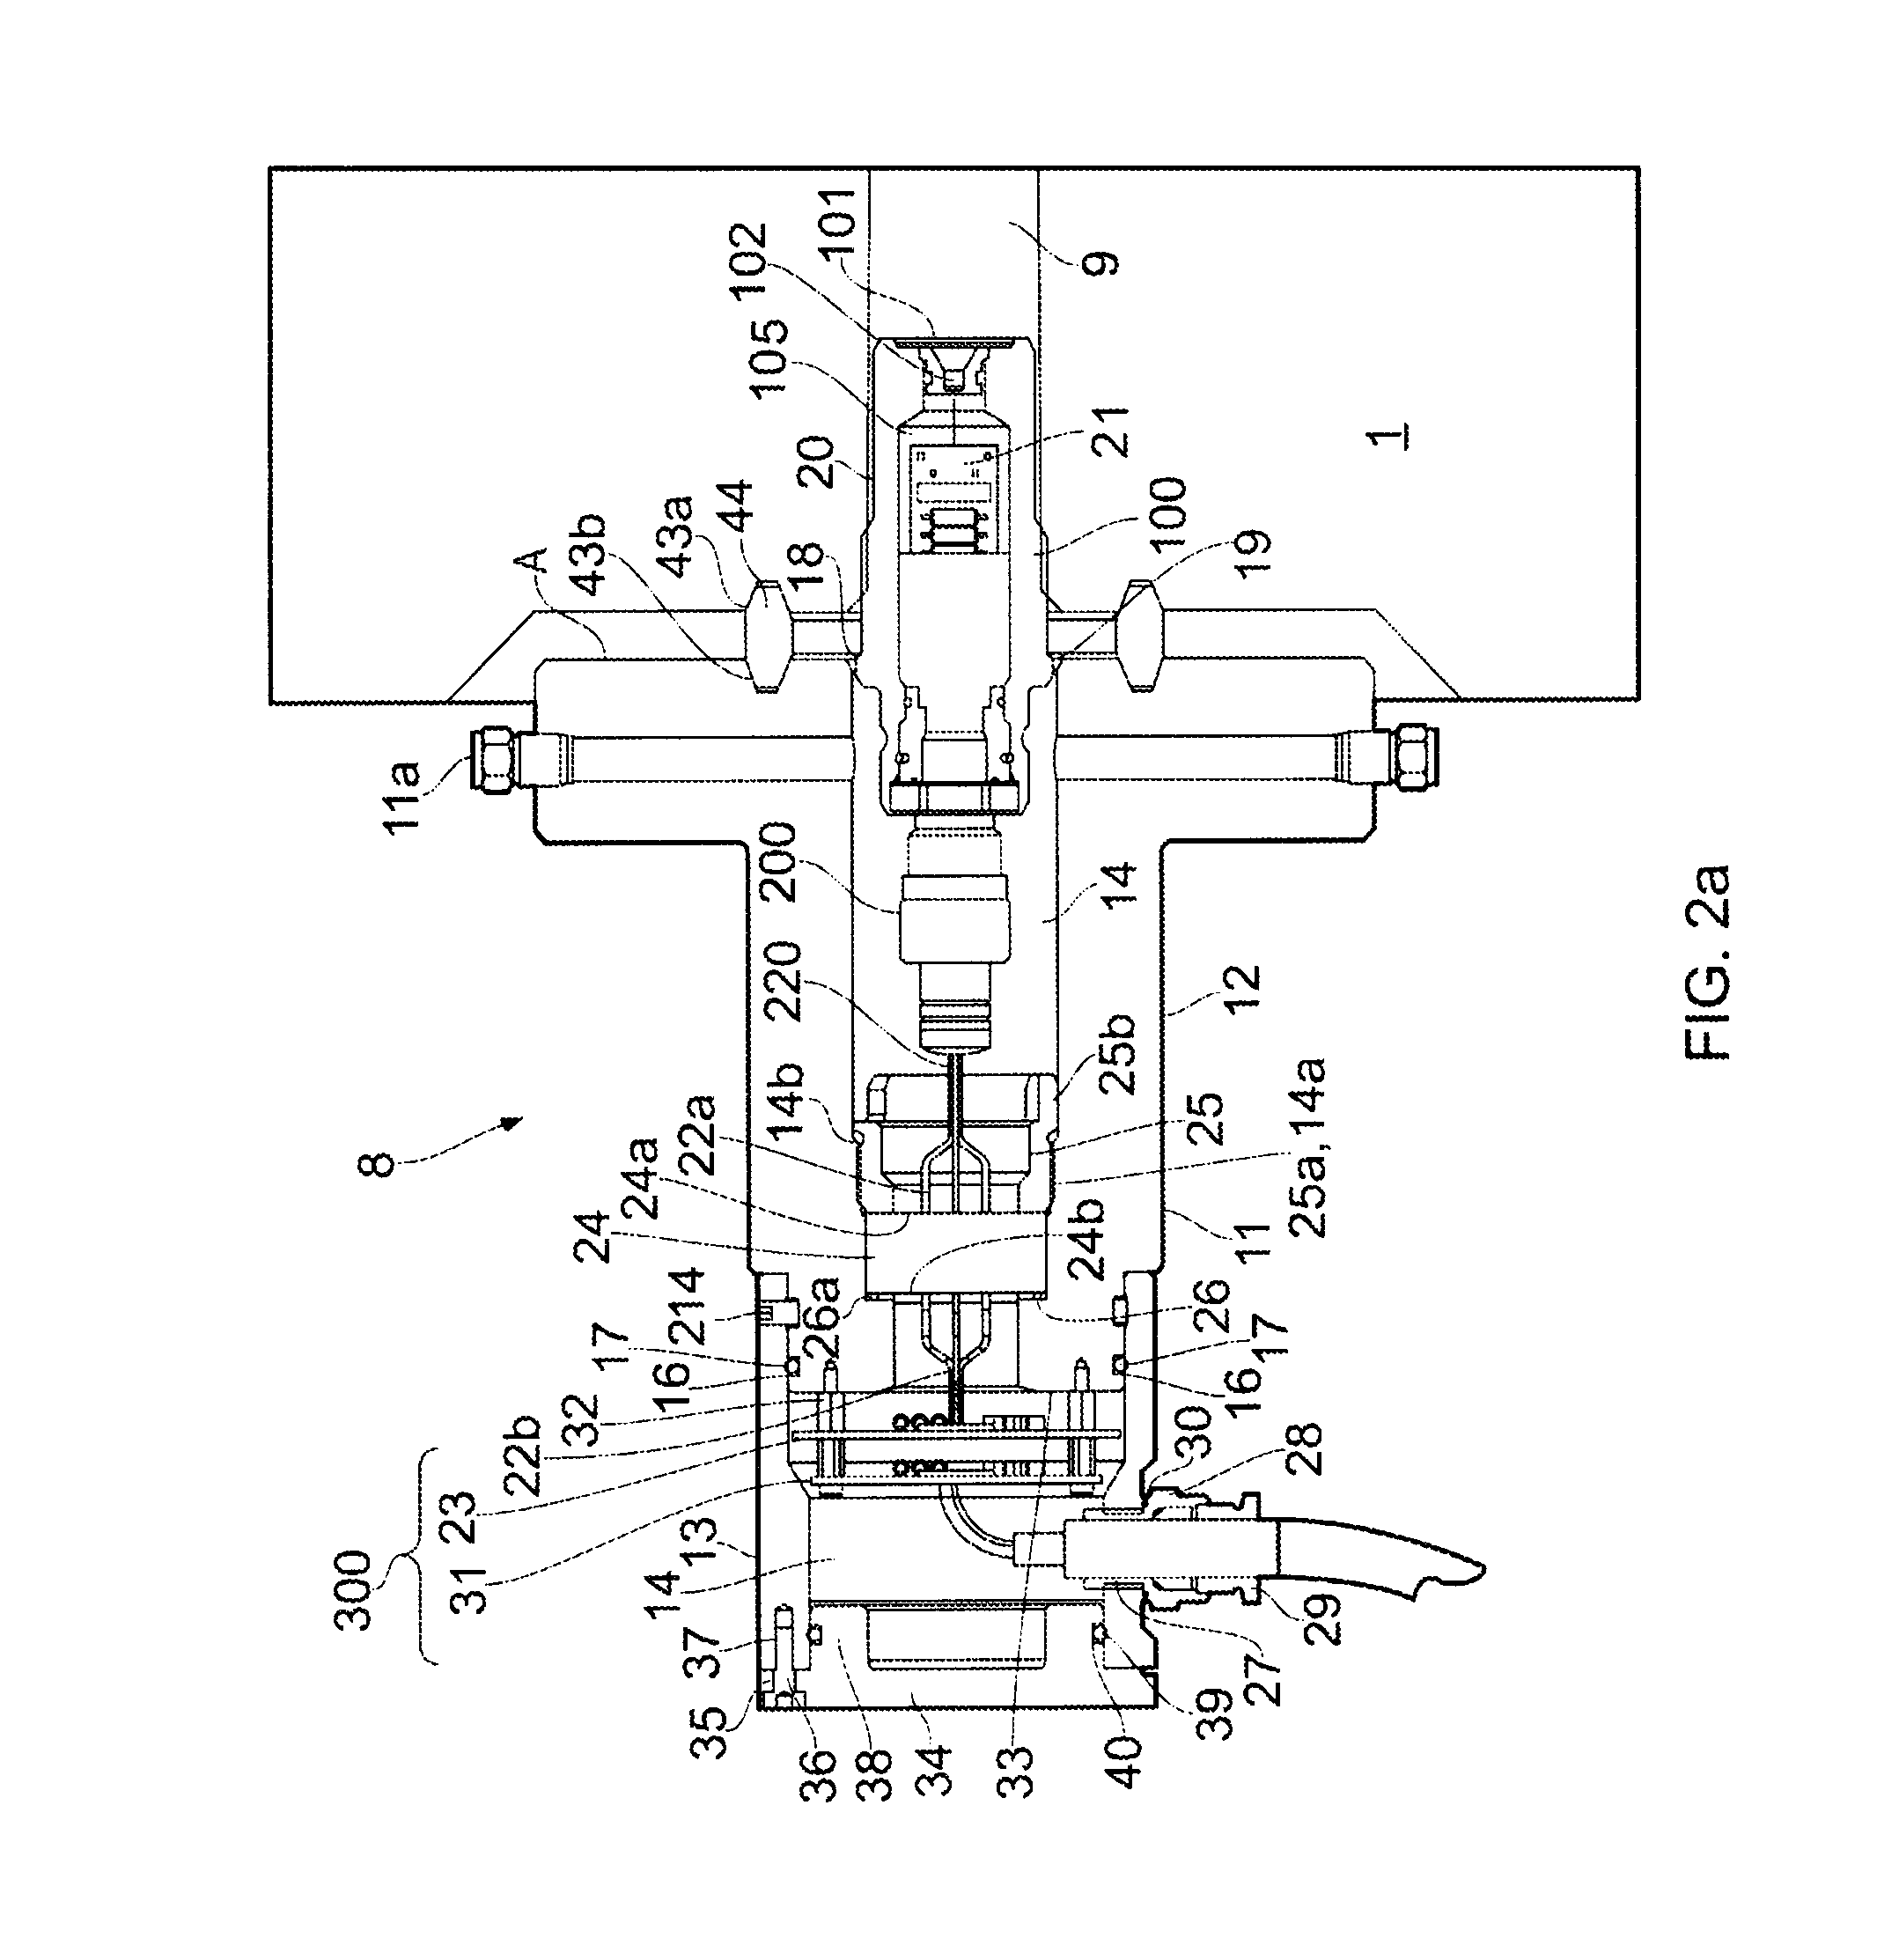 Methods for installing and retrieving a well monitoring apparatus